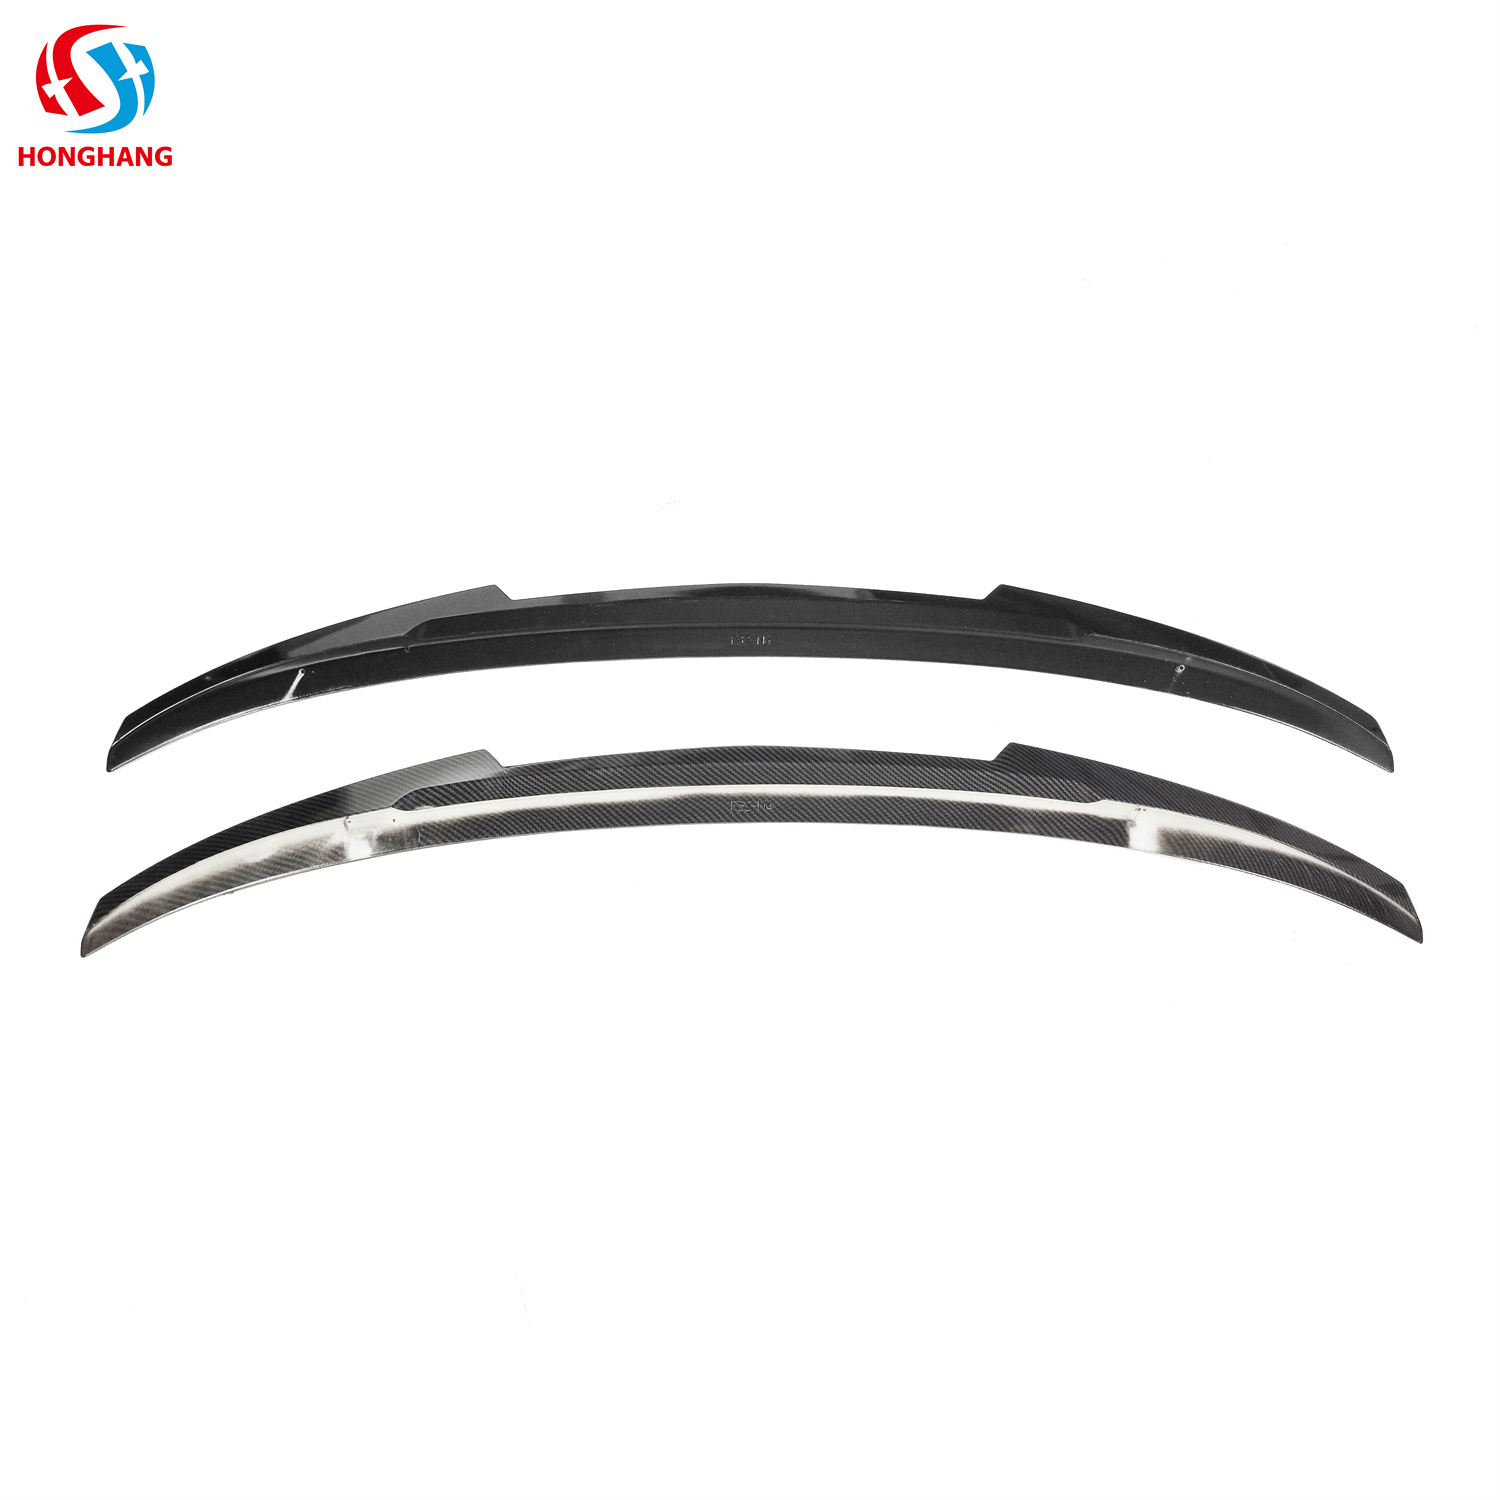 M4 style Rear Spoiler for Bmw 4 Series F32